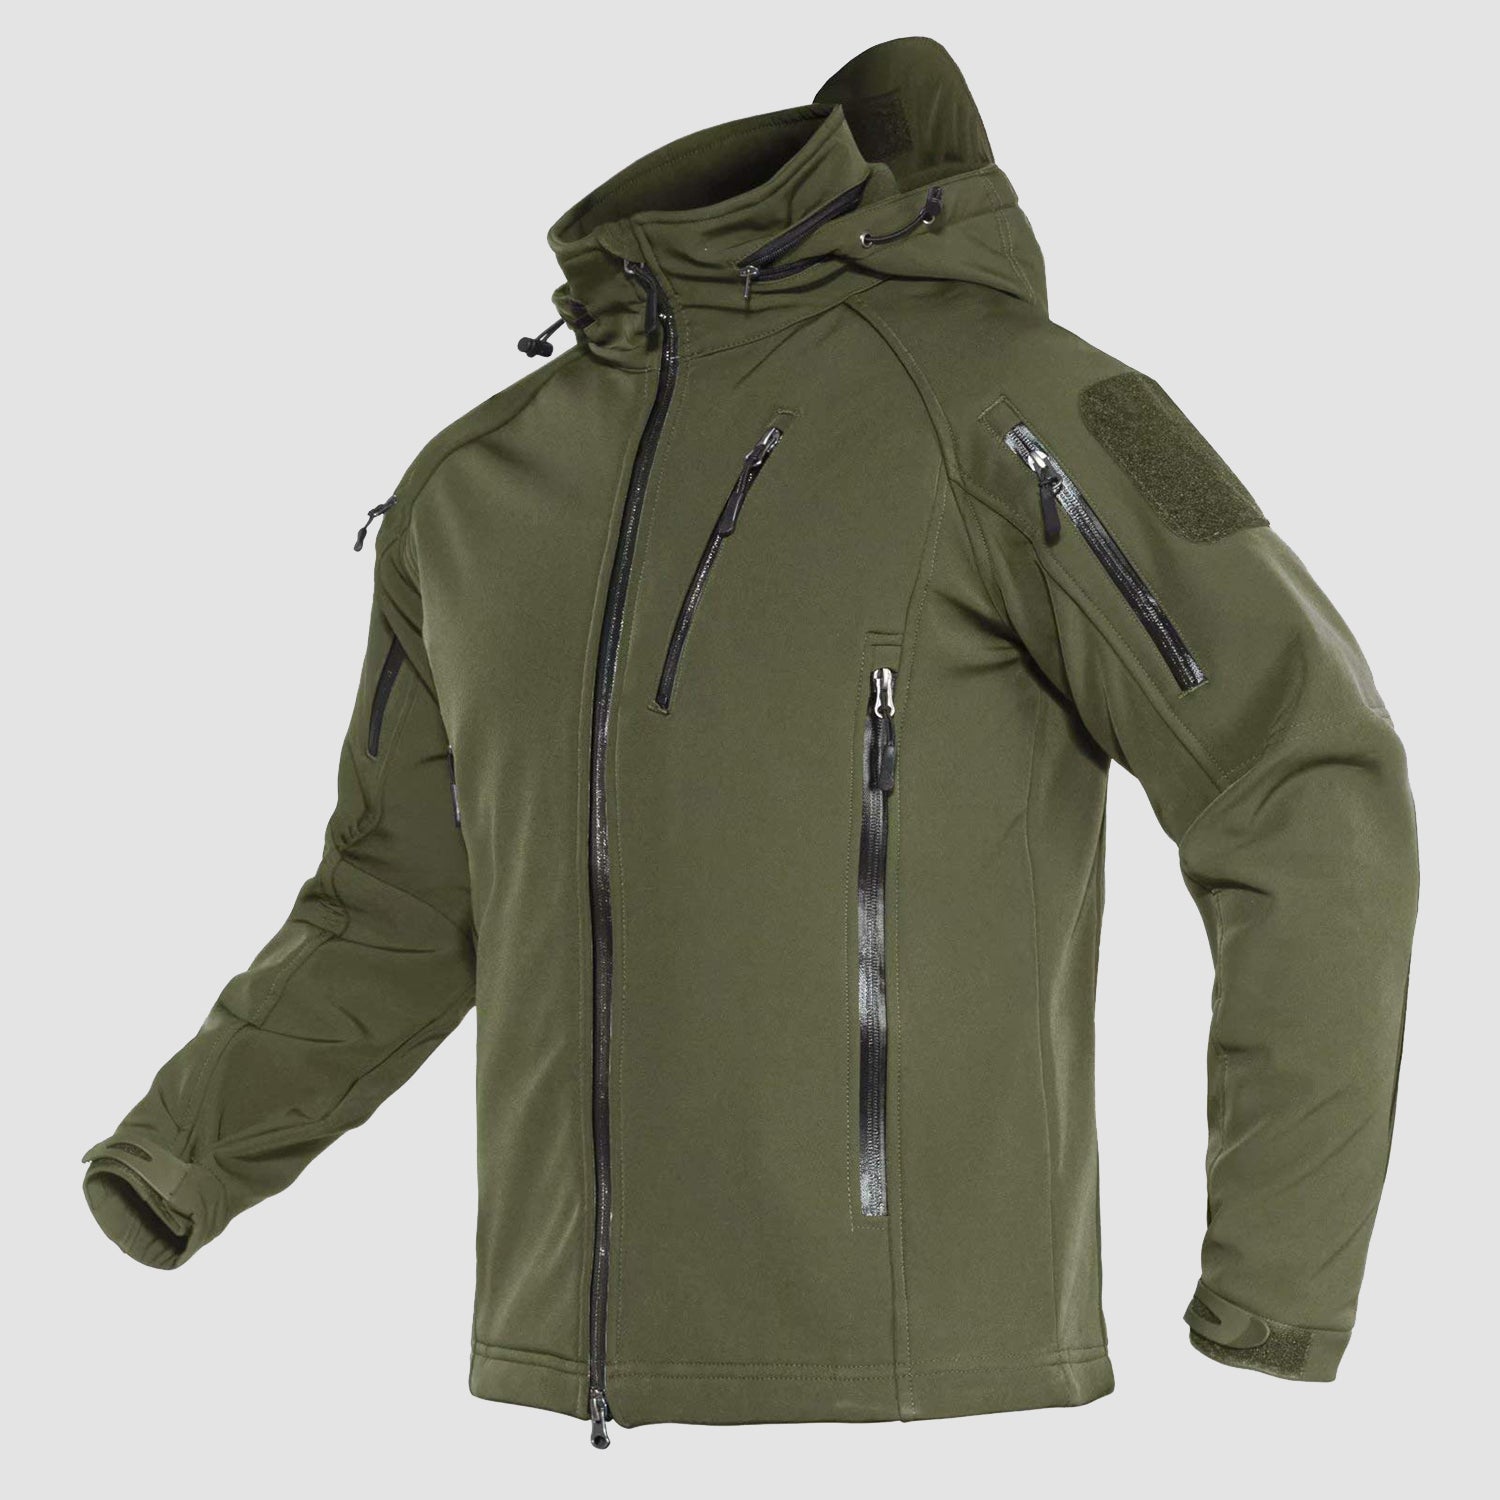 Men's Winter Coats with 8 Pockets Foldable Hooded Water & Wind Resistant Softshell Tactical Jacket